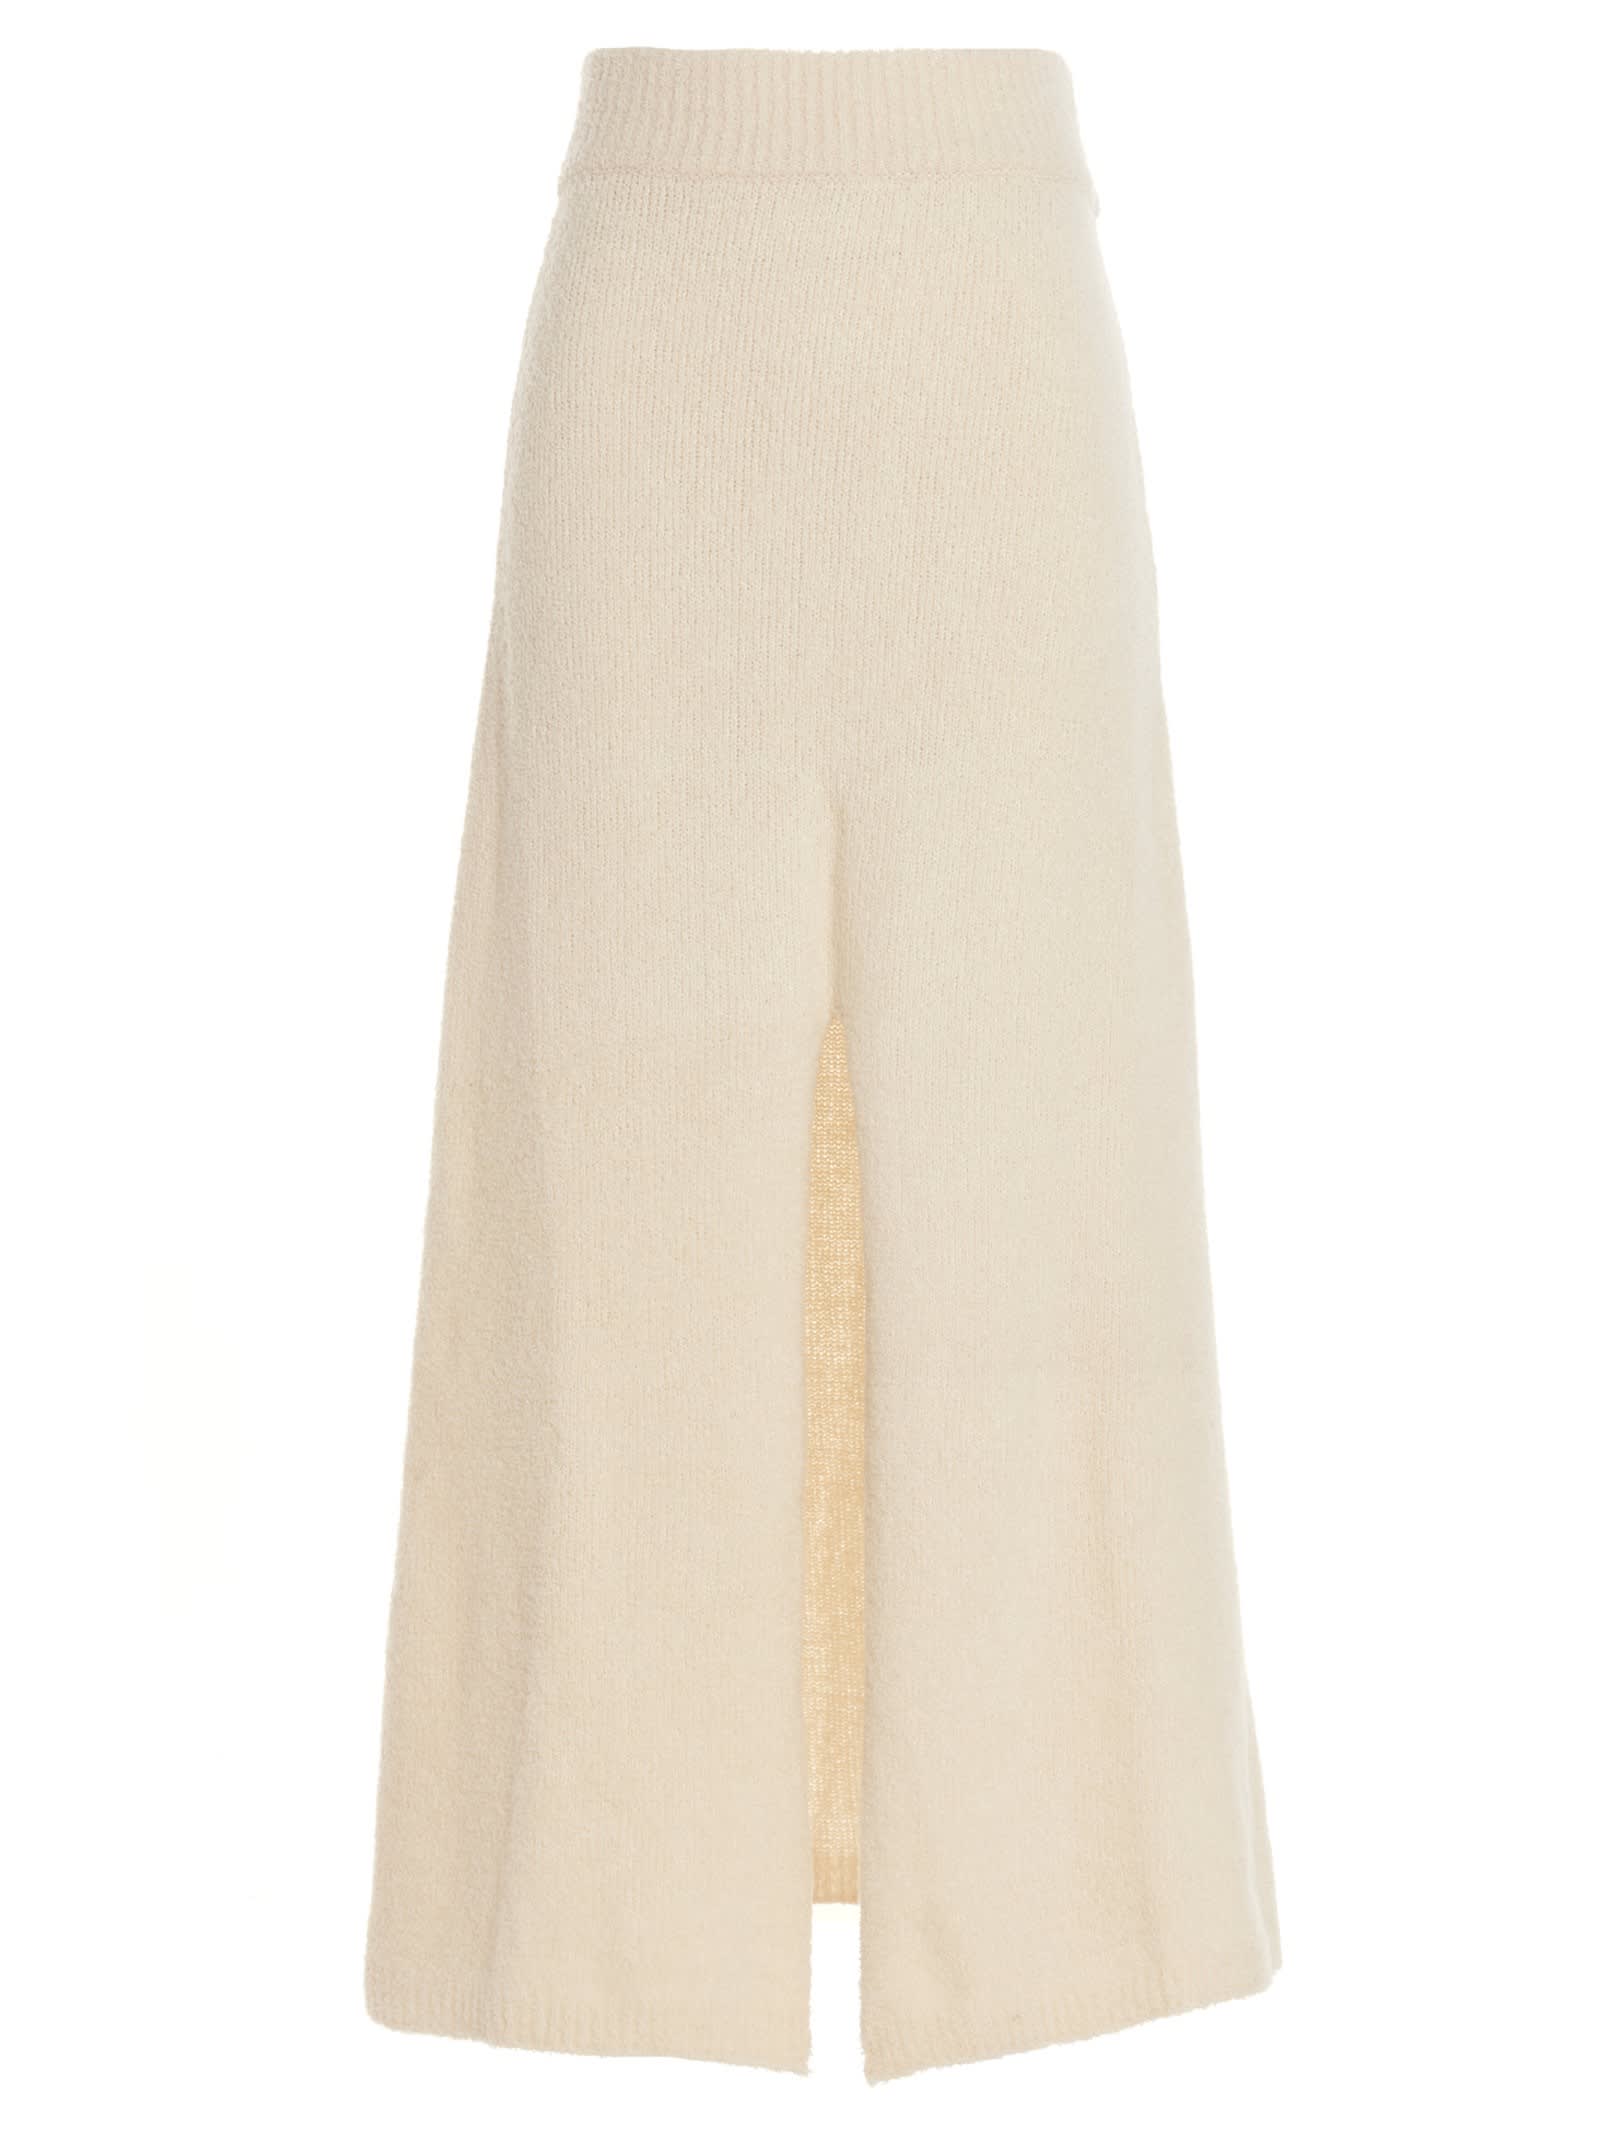 Canessa Knitted Skirt With A Slit